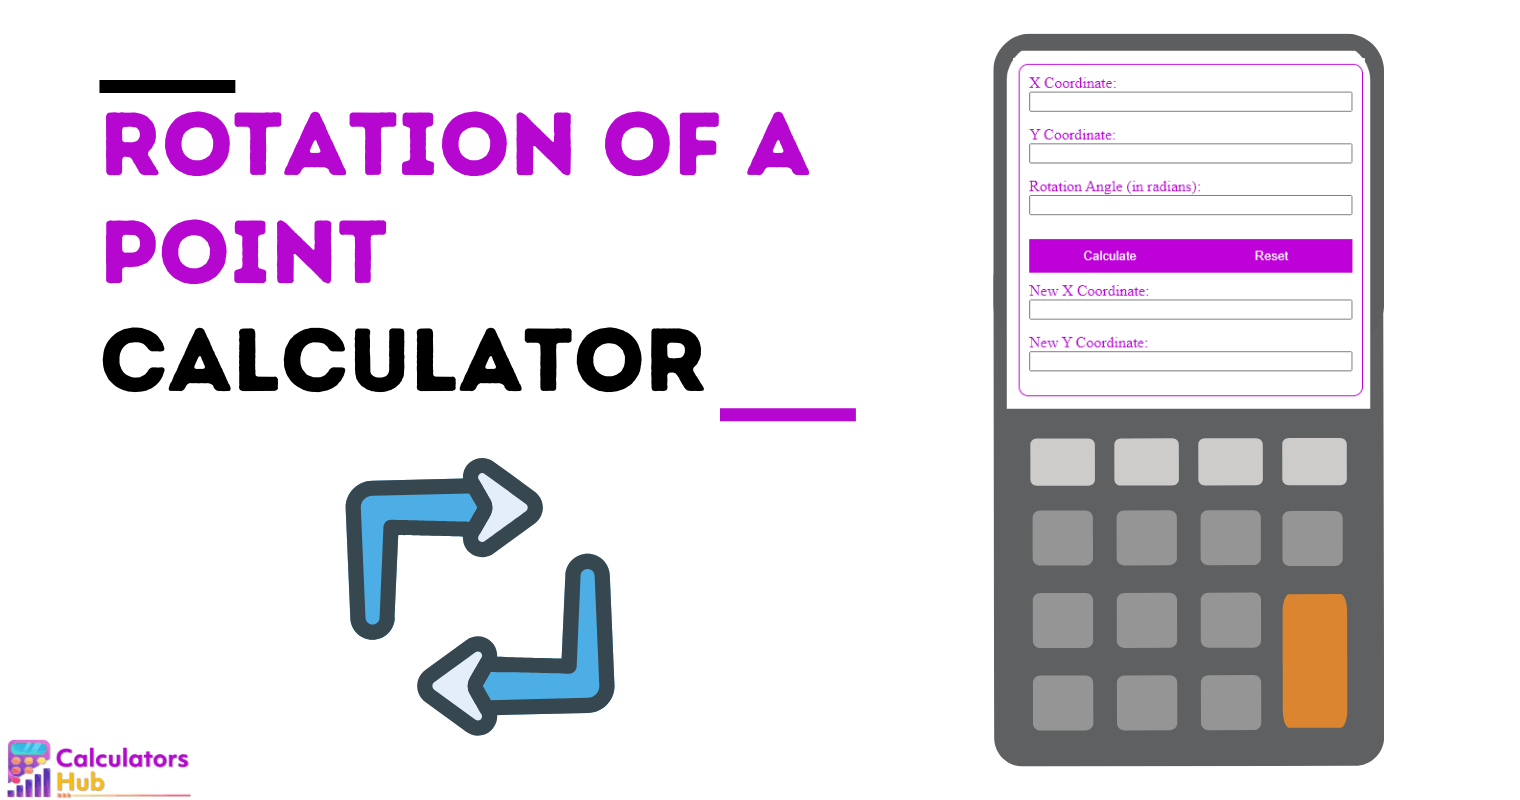 Rotation of a Point Calculator